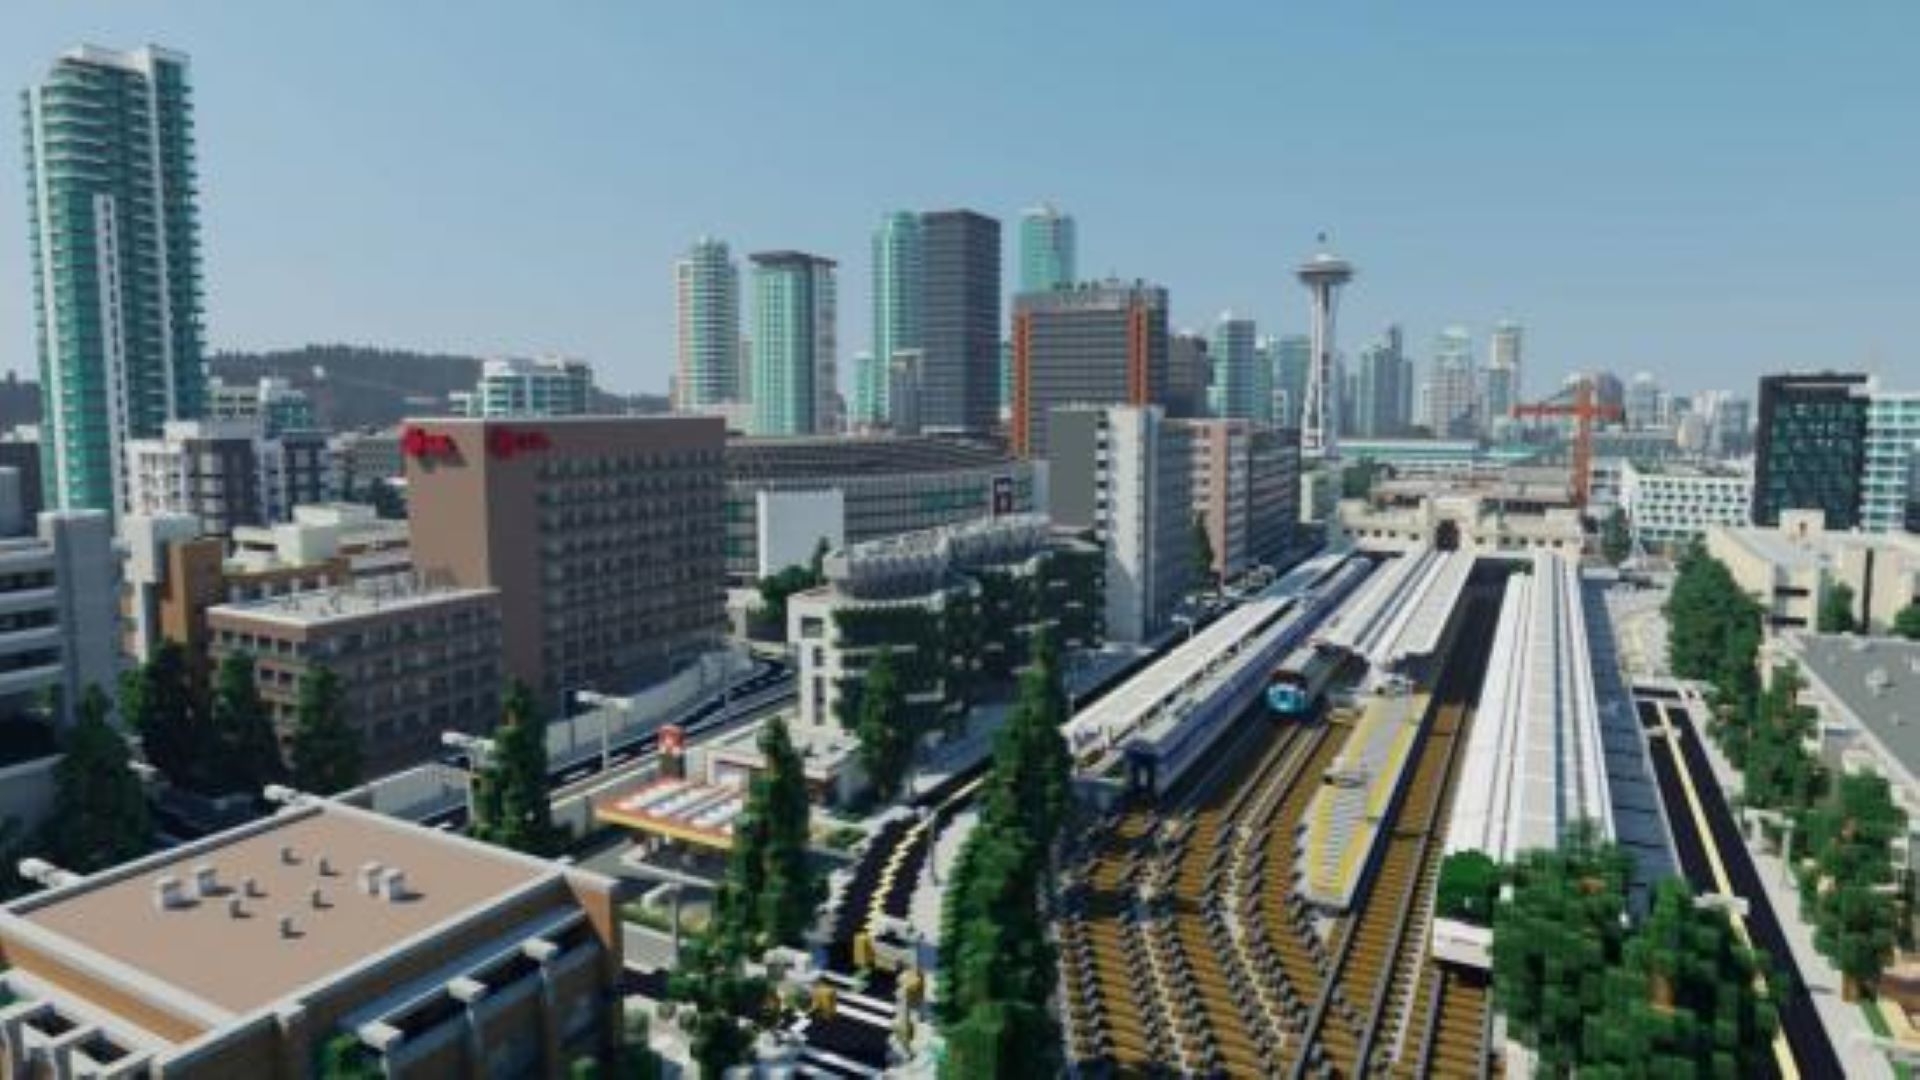 Minecraft map is an incredible cityscape 2.5 years in the making